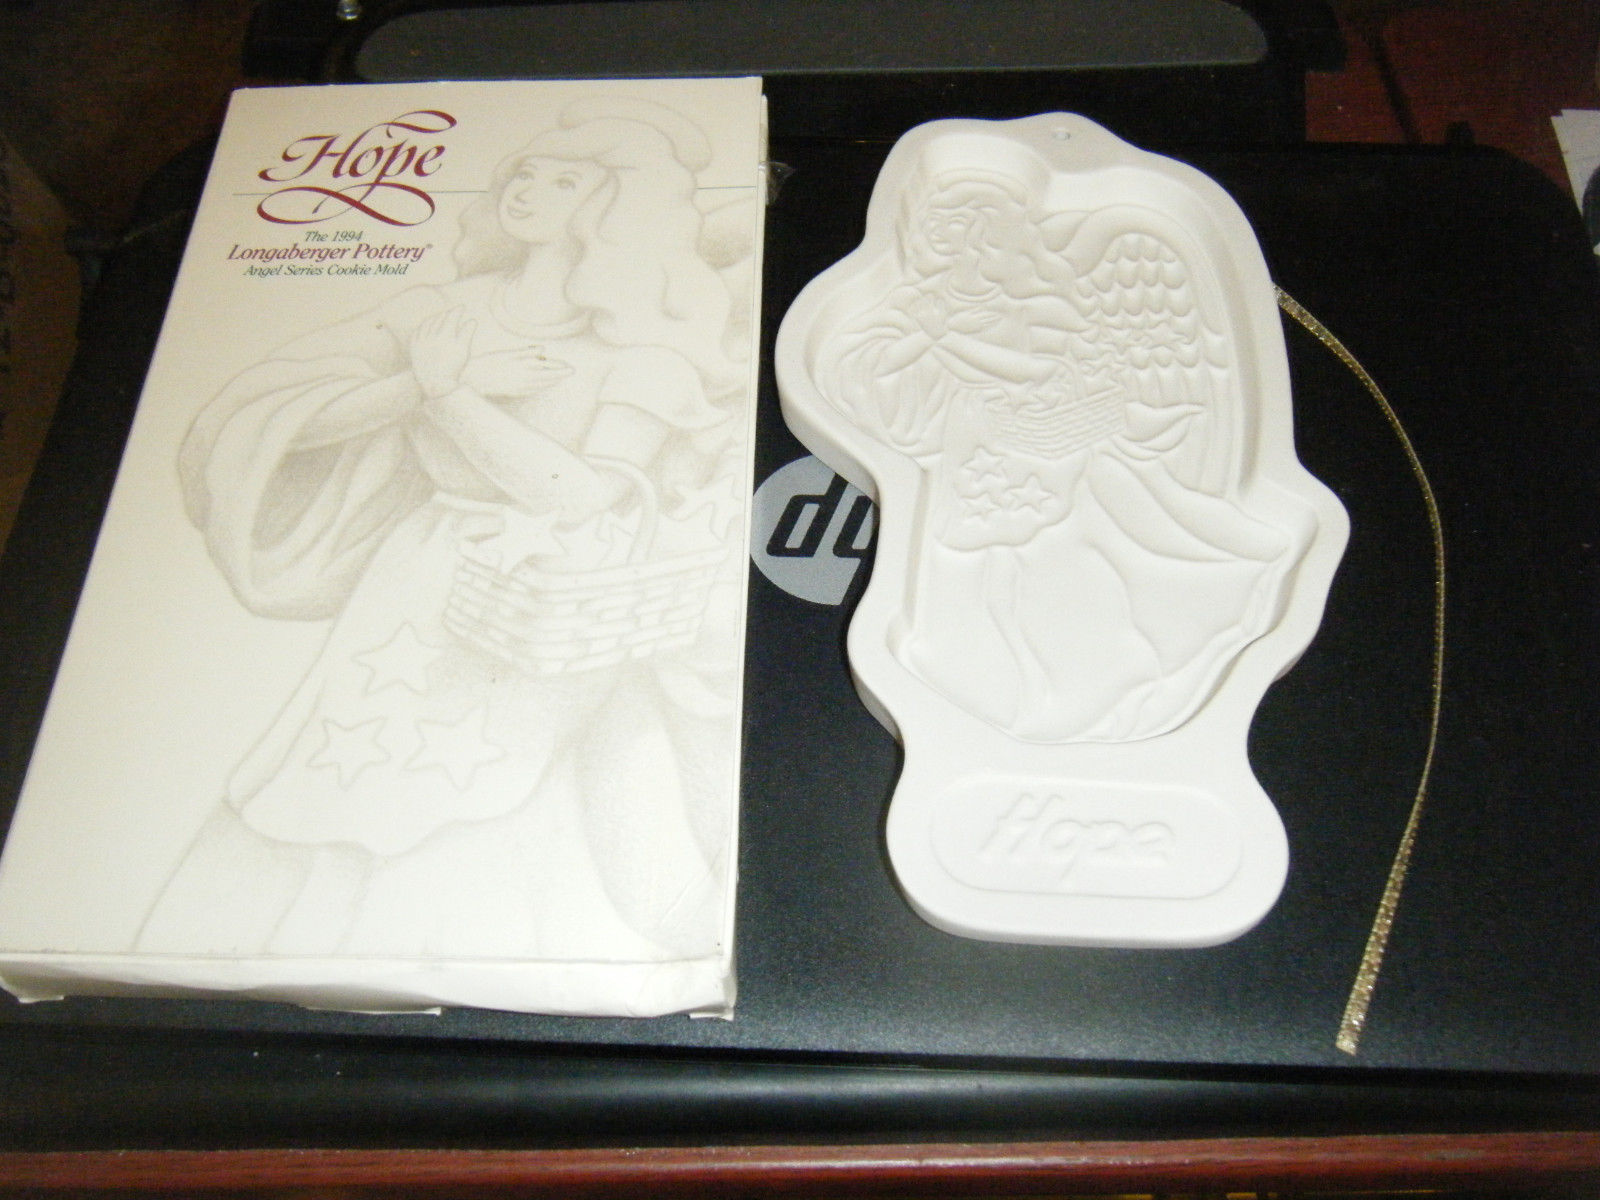 Primary image for Longaberger Pottery 1994 Hope Angel Series Cookie Mold w/Box